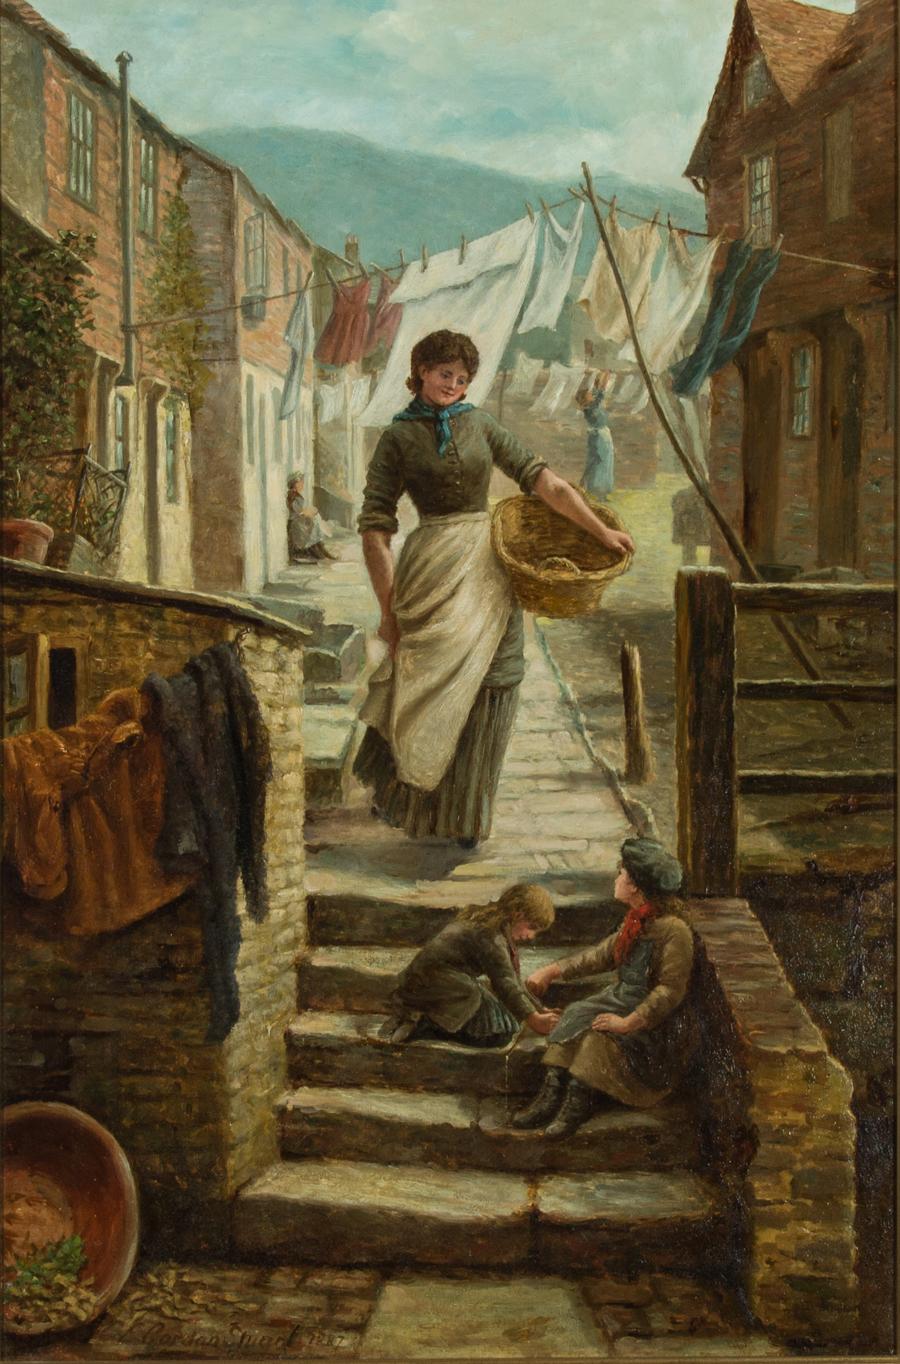 We are pleased to present this stunning late Victorian oil painting by the highly acclaimed English painted C.E. Gordon Stuart (fl. 1892-1896)

Depicting a Cornish fishing family in their terraced house, the artist has expertly captured the everyday